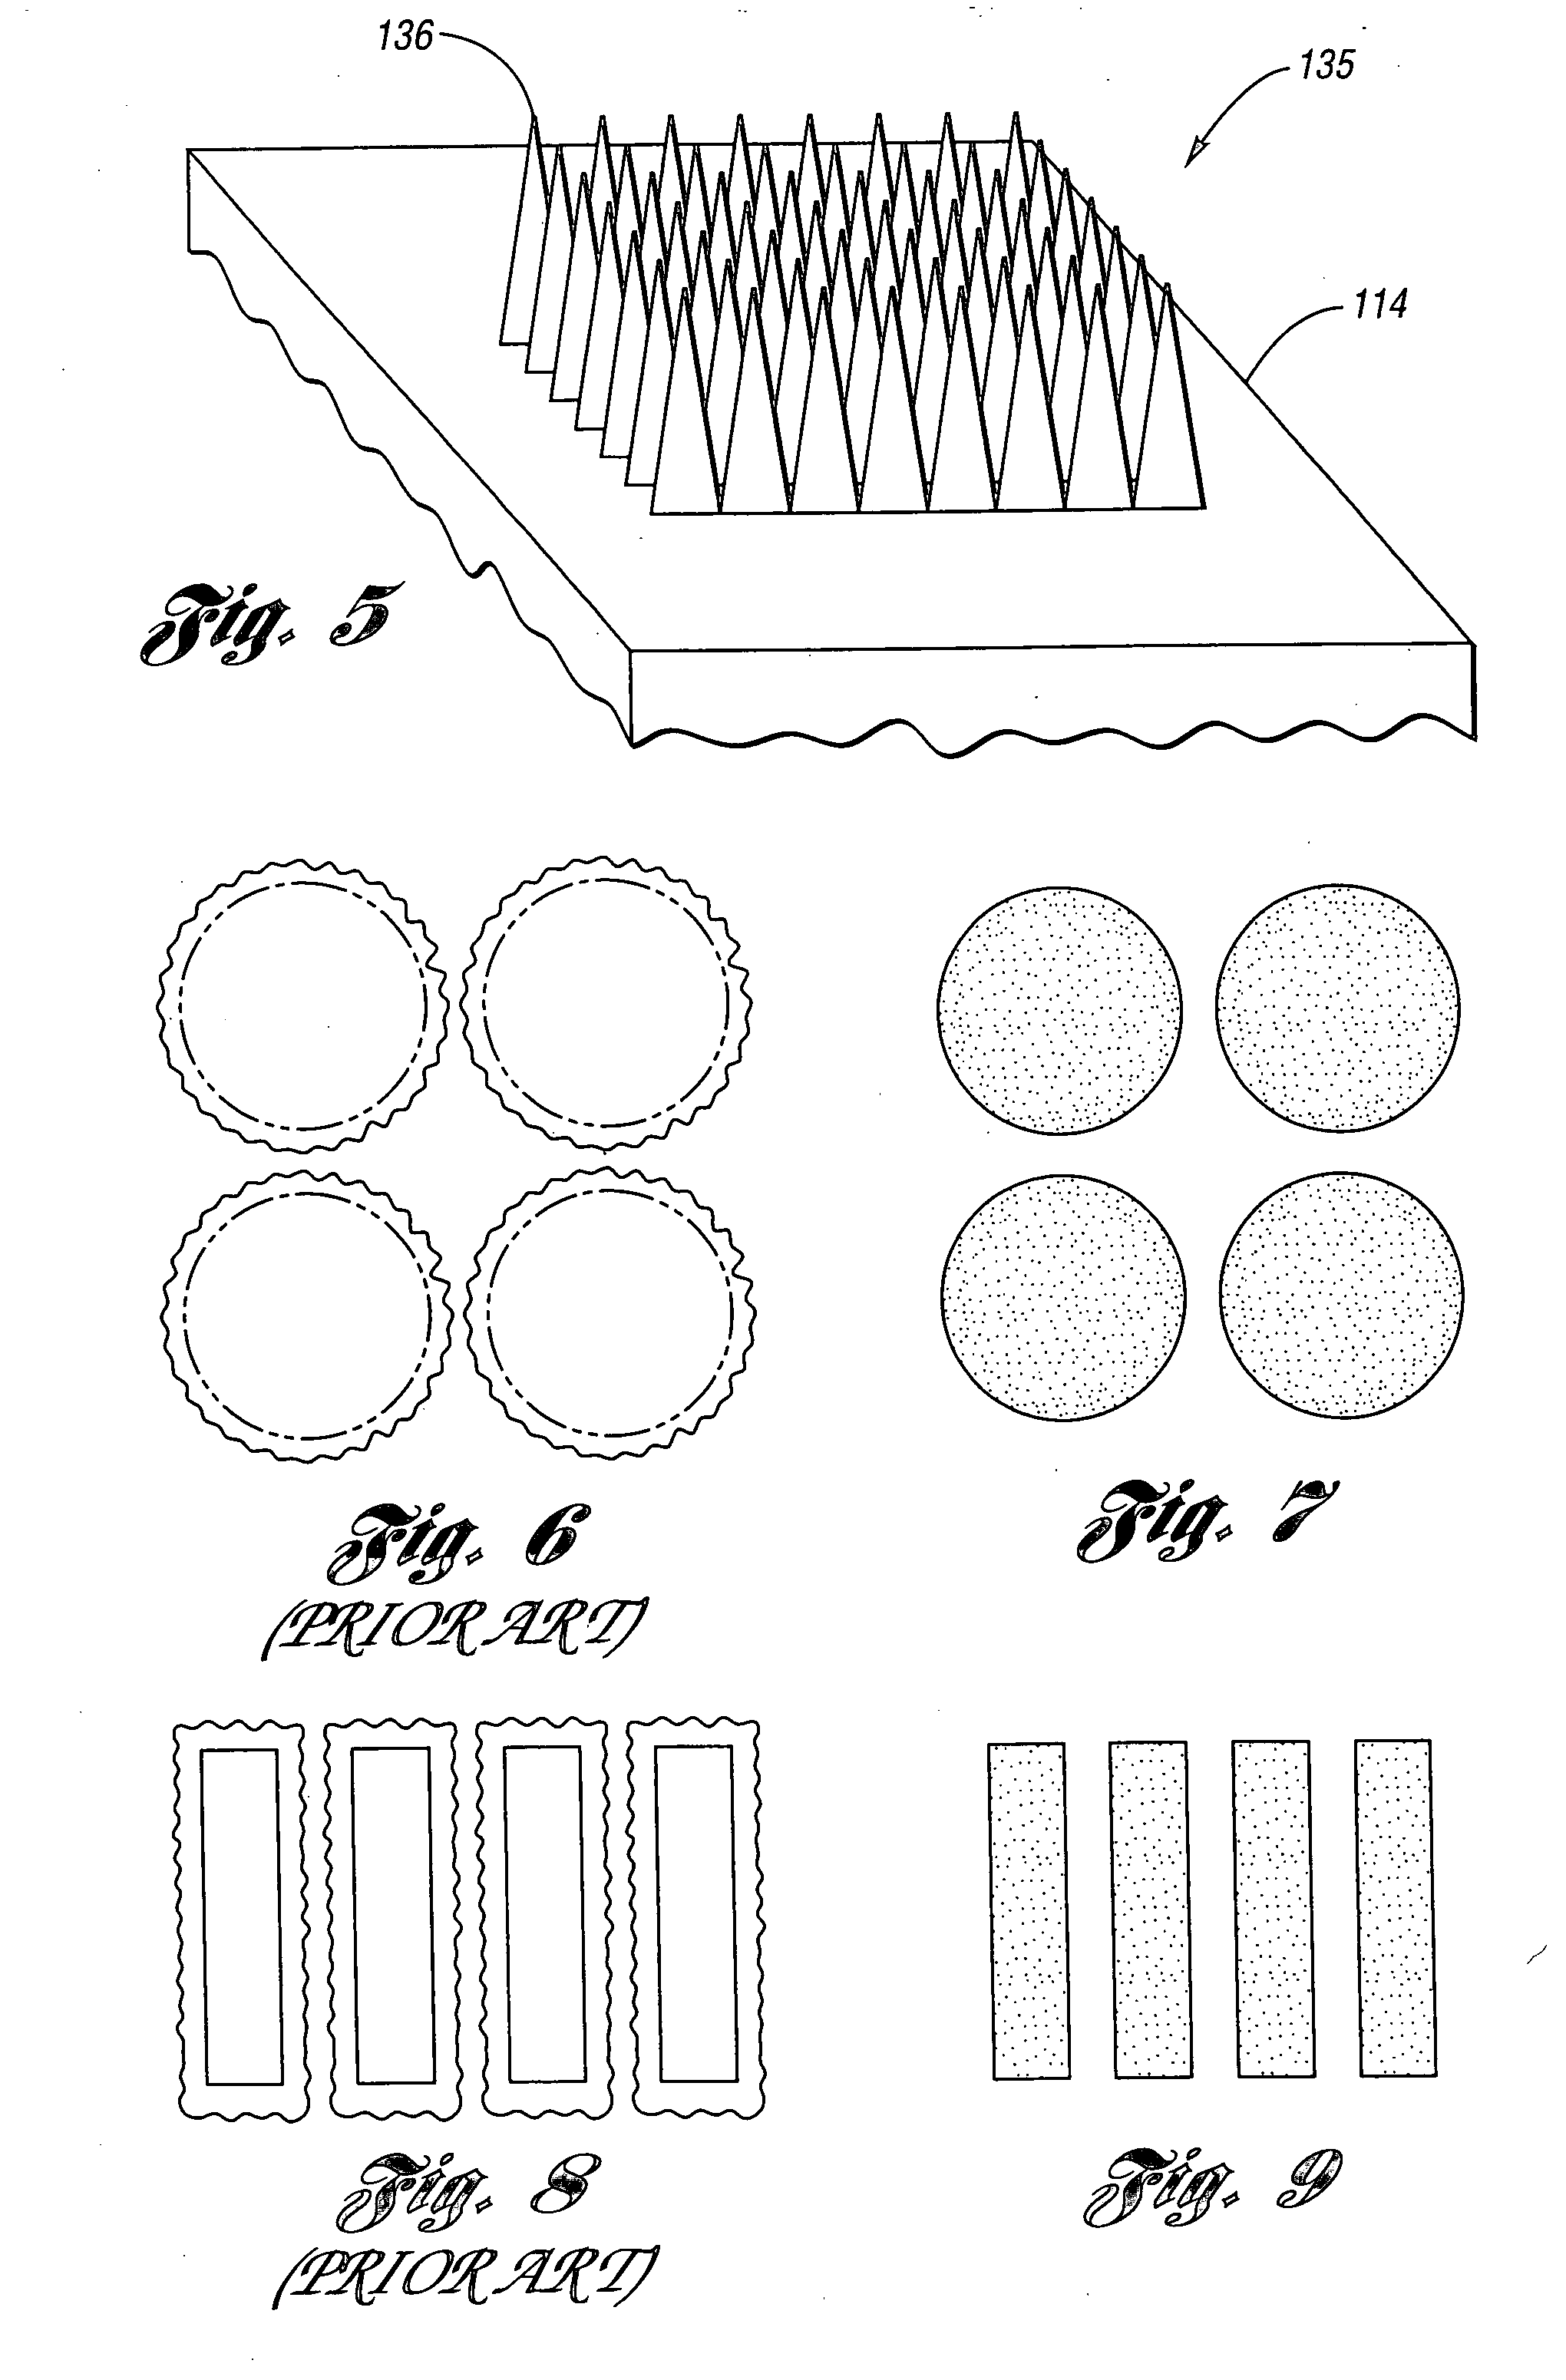 Laser-based method and system for processing targeted surface material and article produced thereby